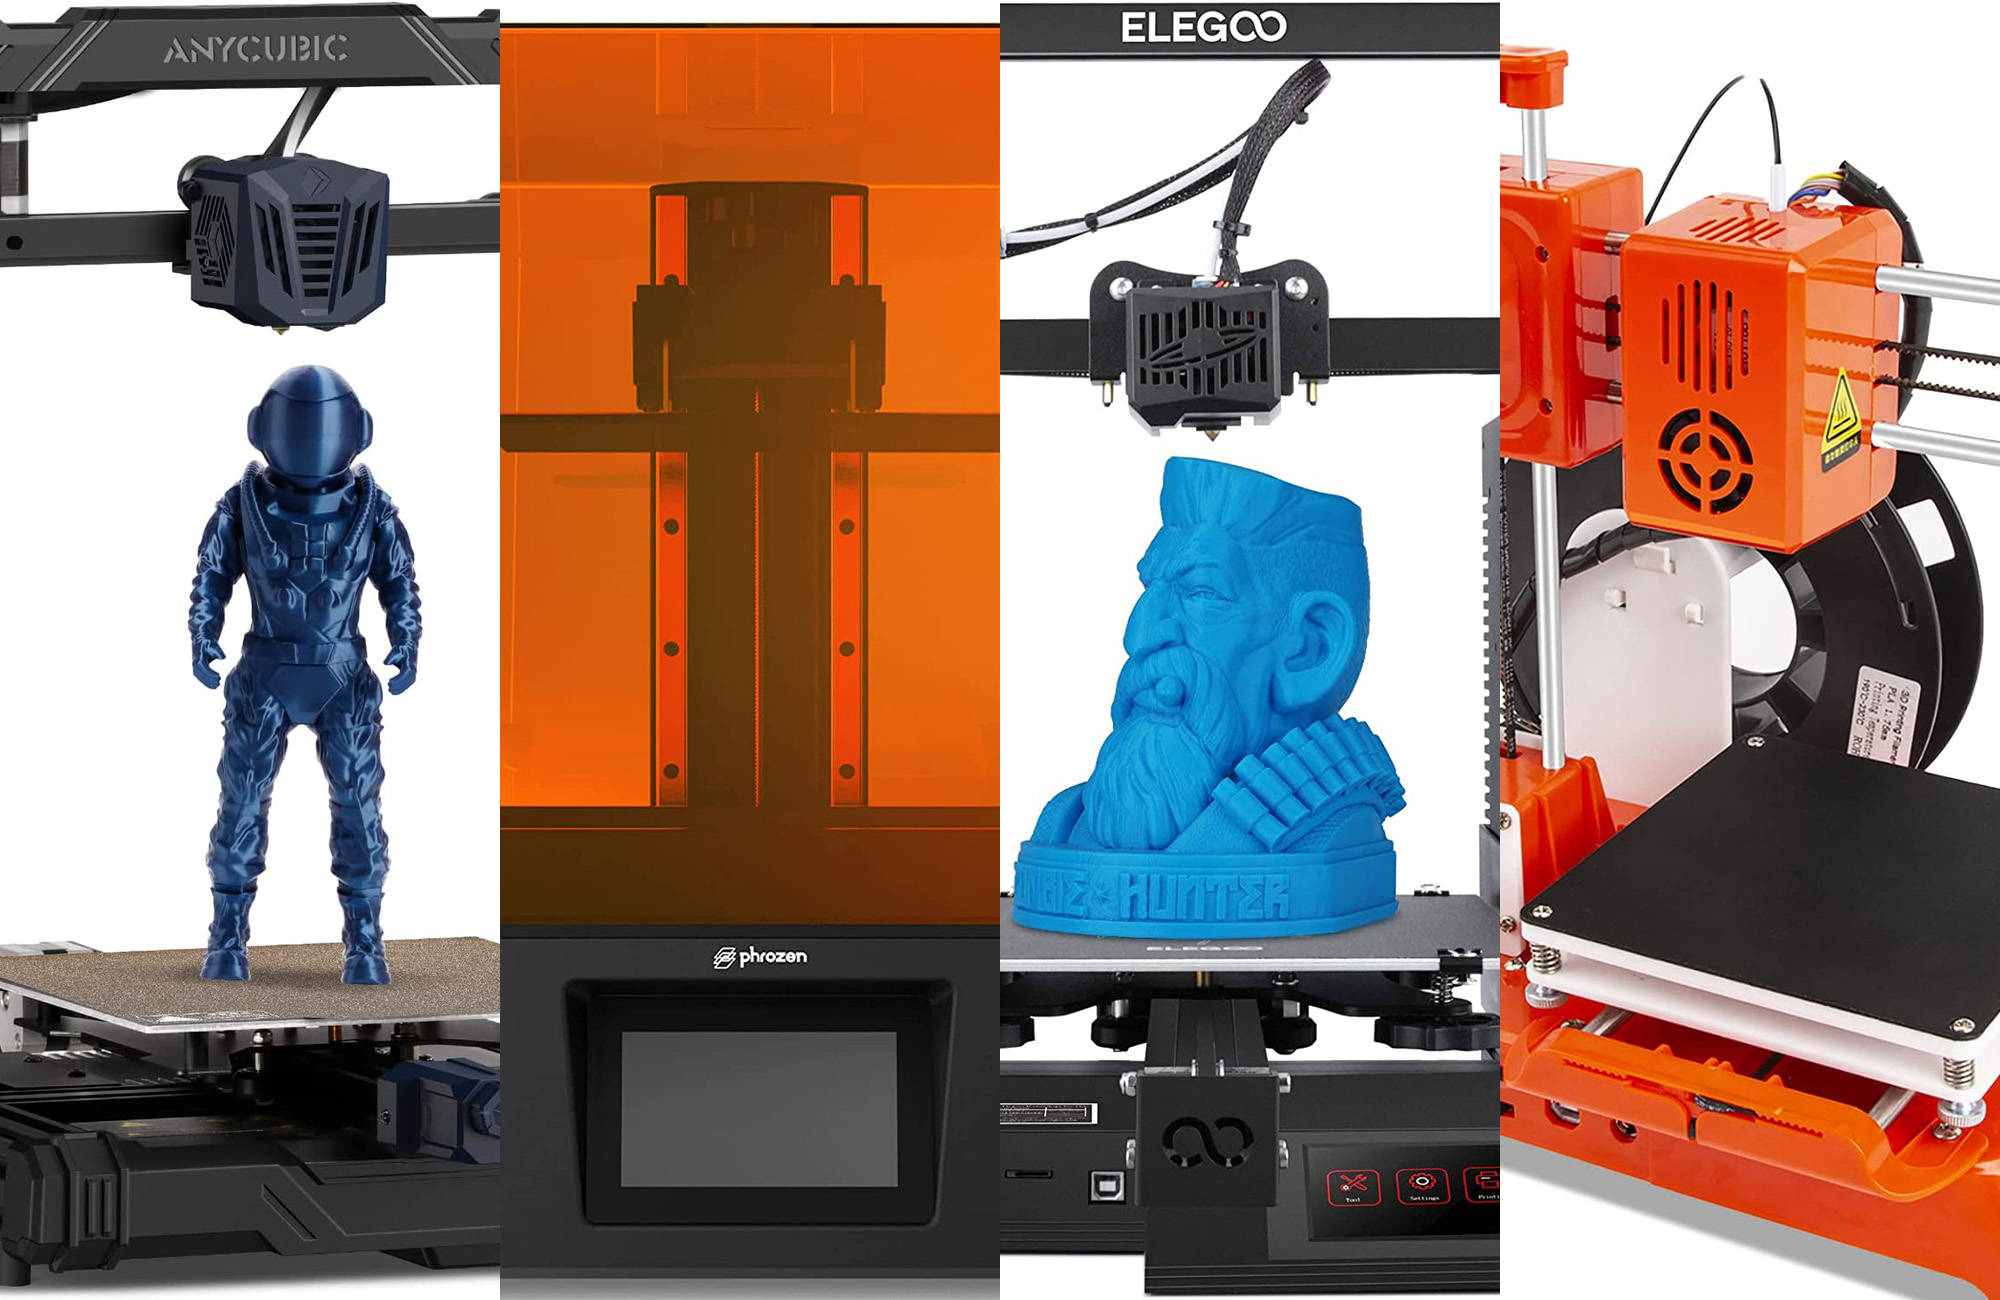 Layer savings on 3D printers during Amazon early Black Friday